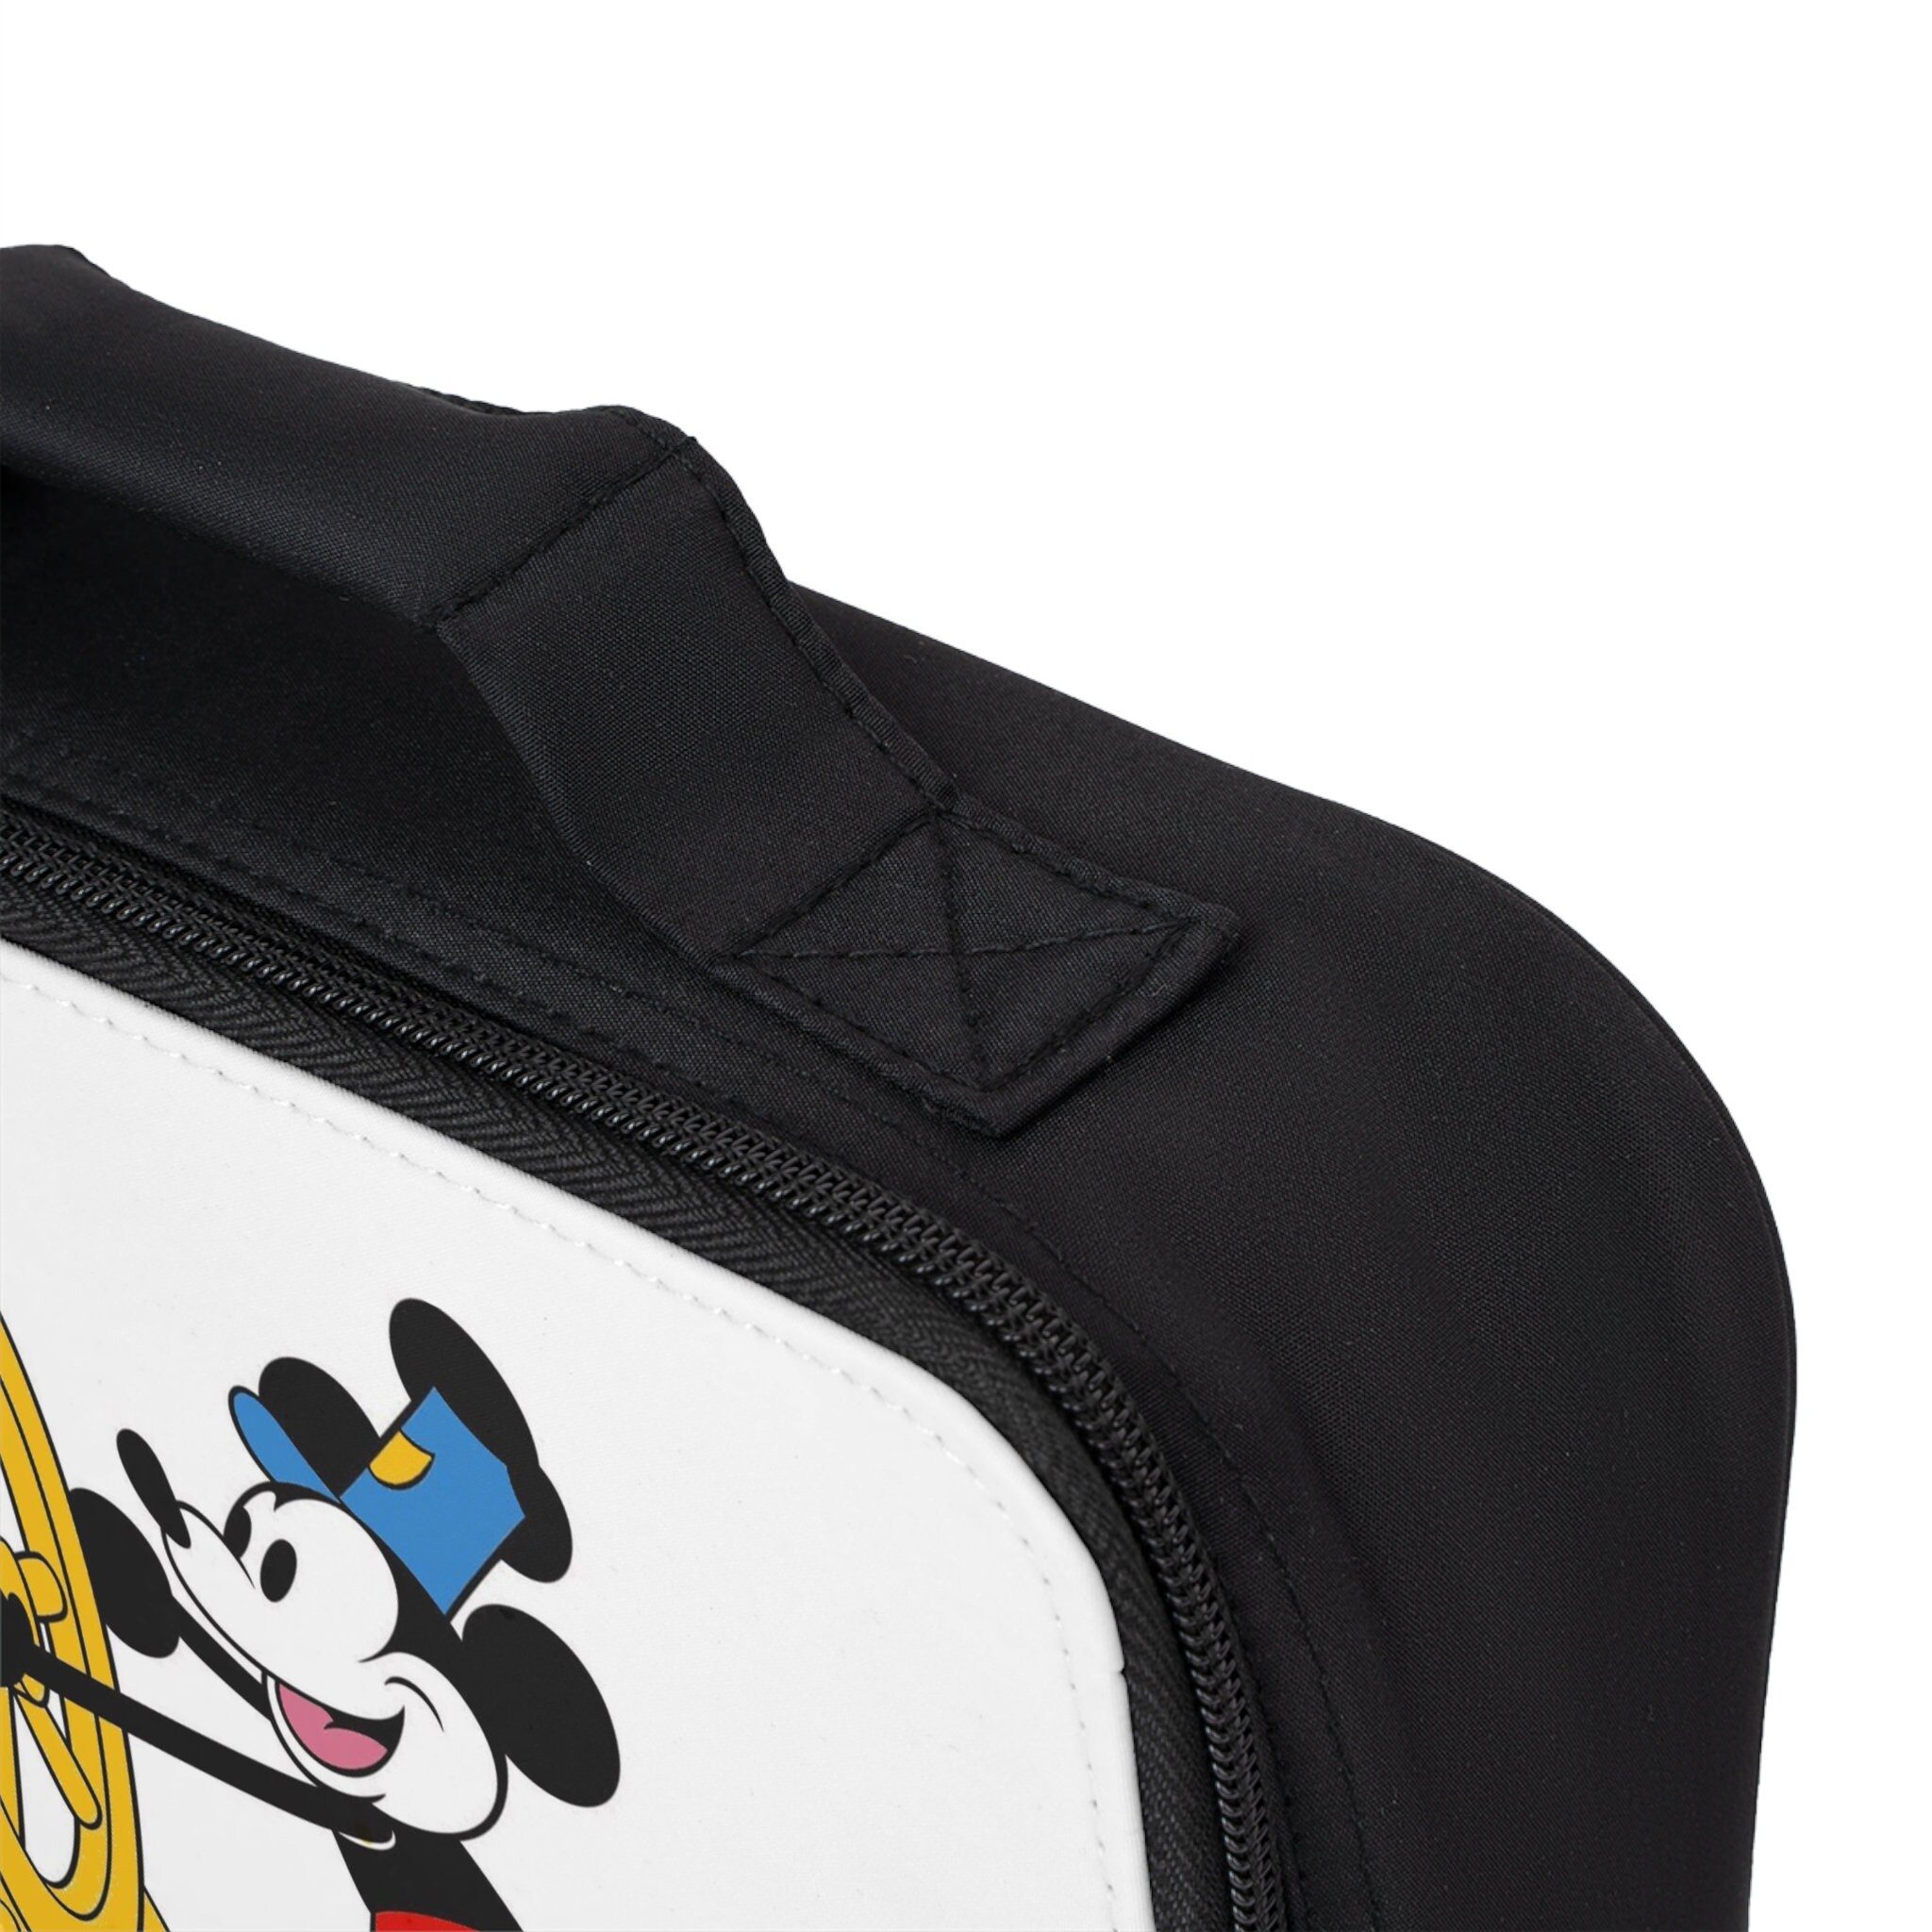 Disney Steamboat Mickey Lunch Bag